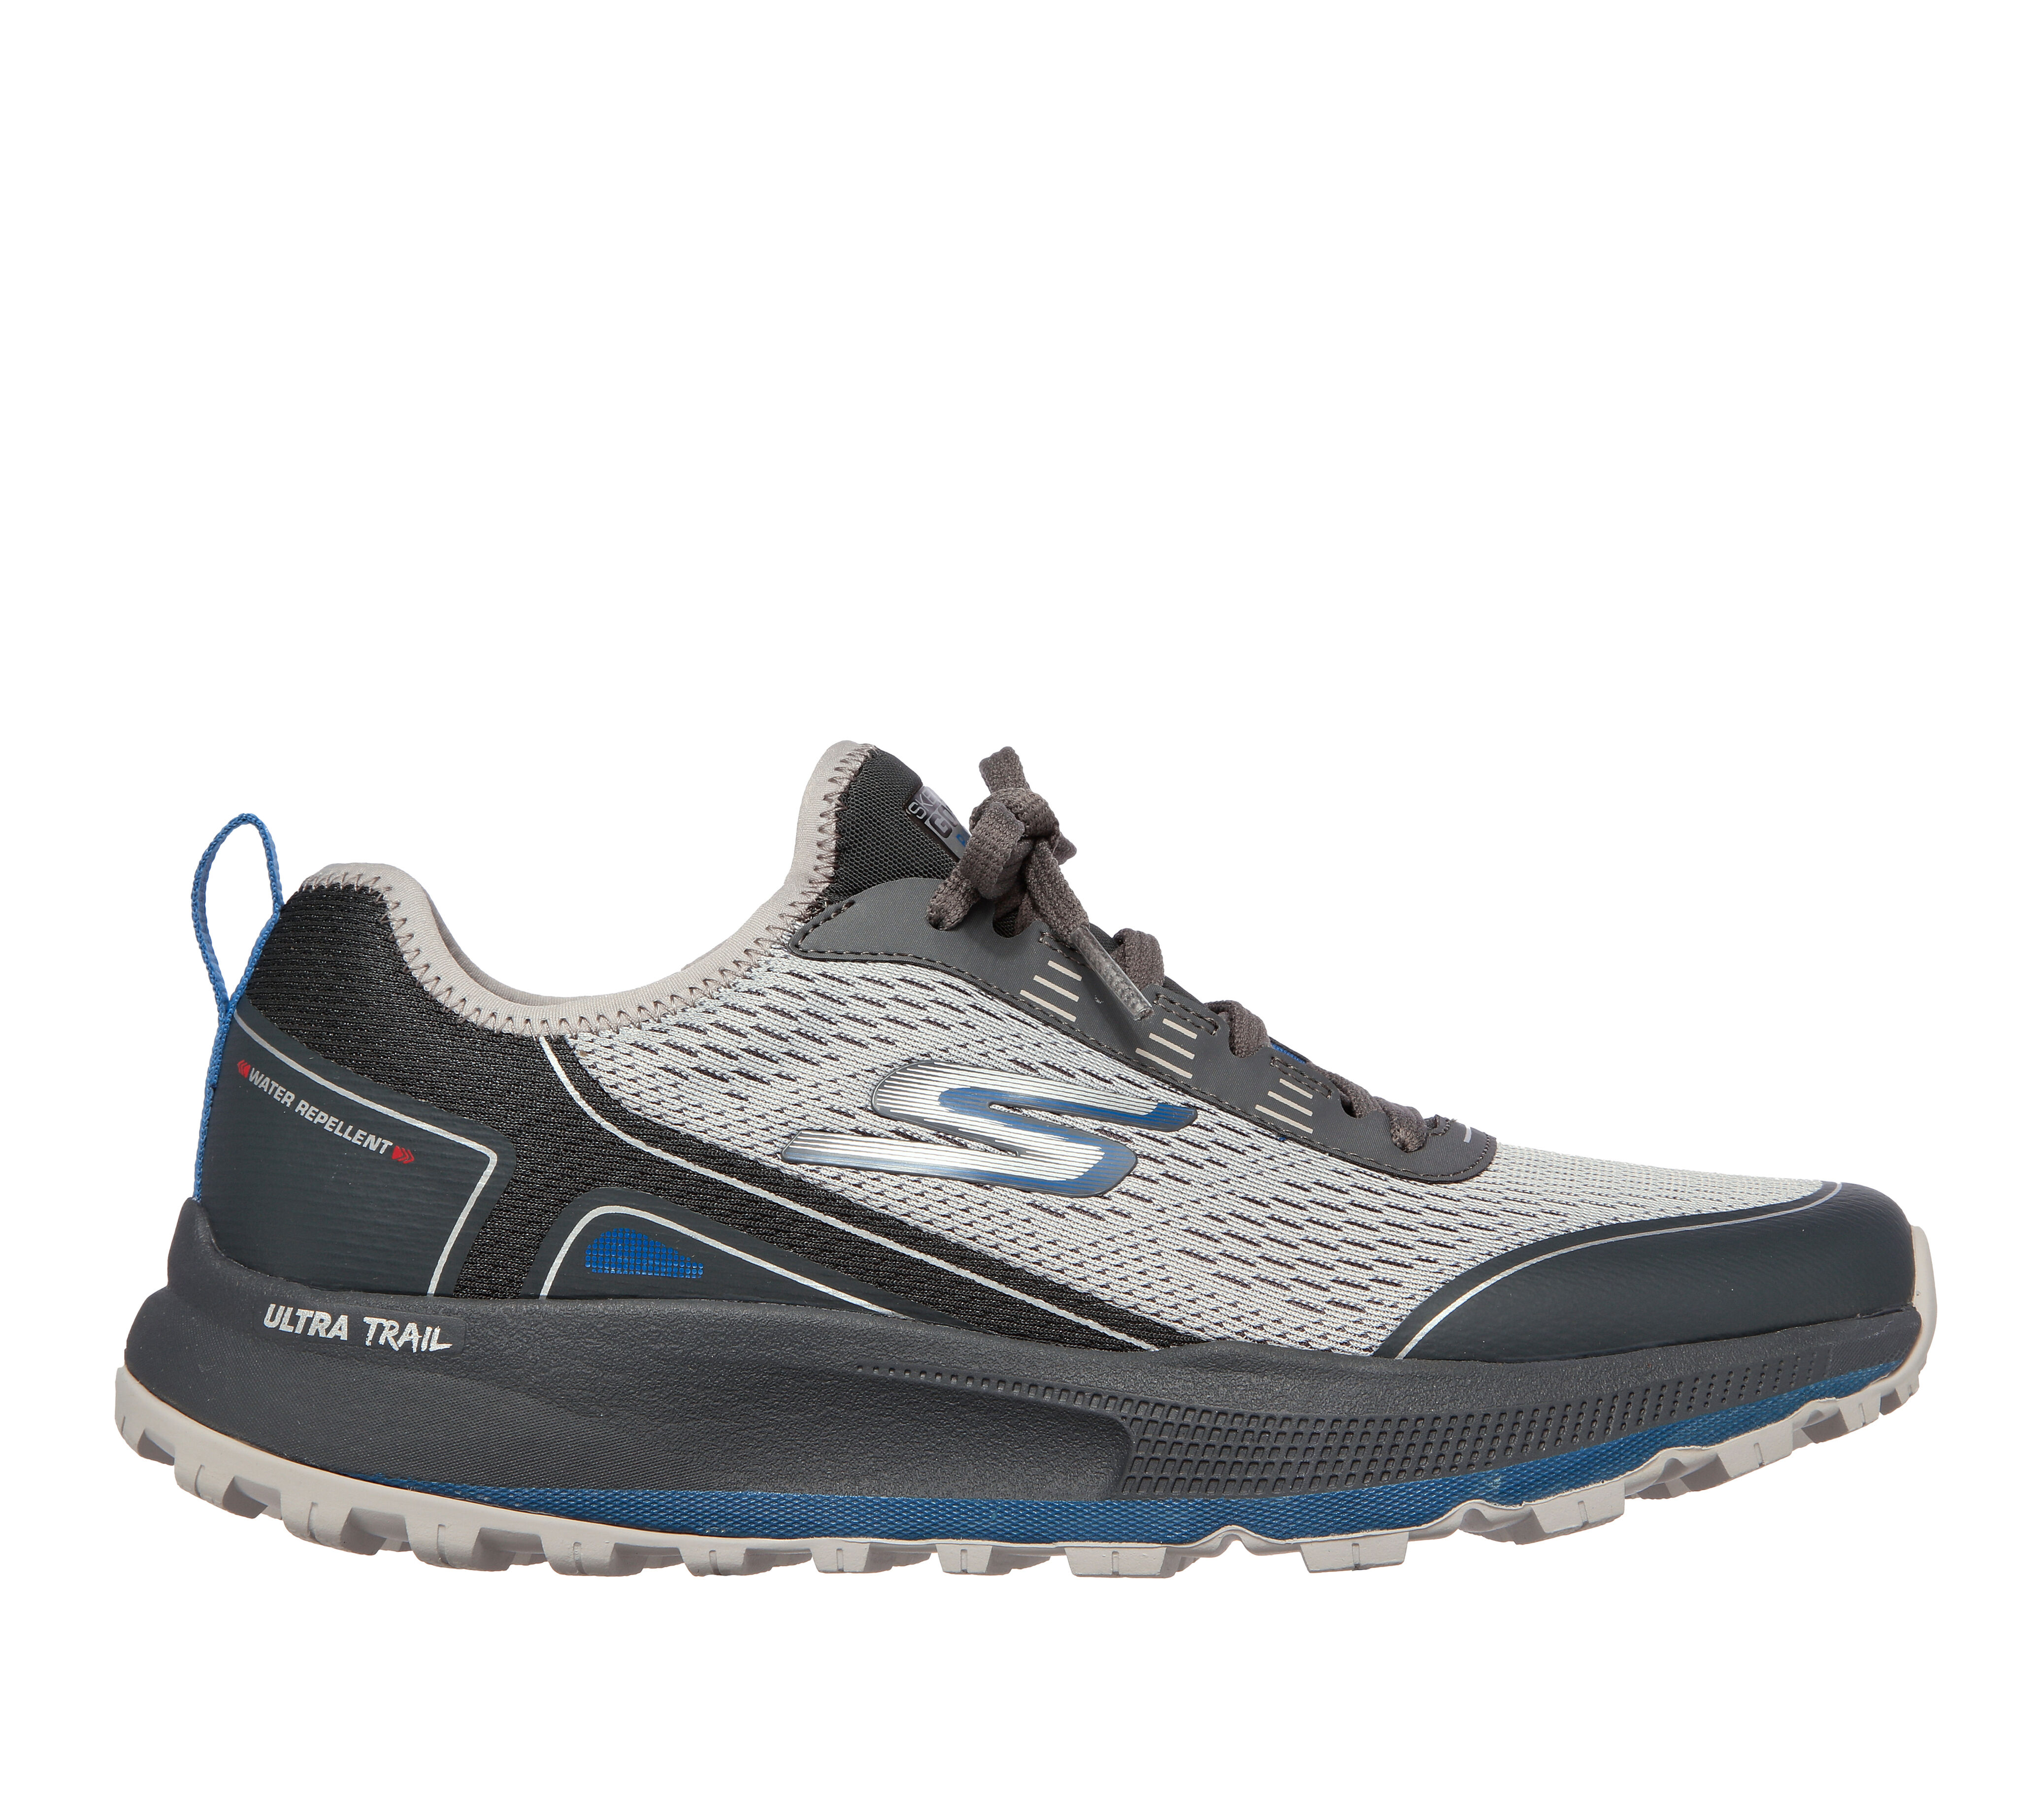 what stores carry skechers